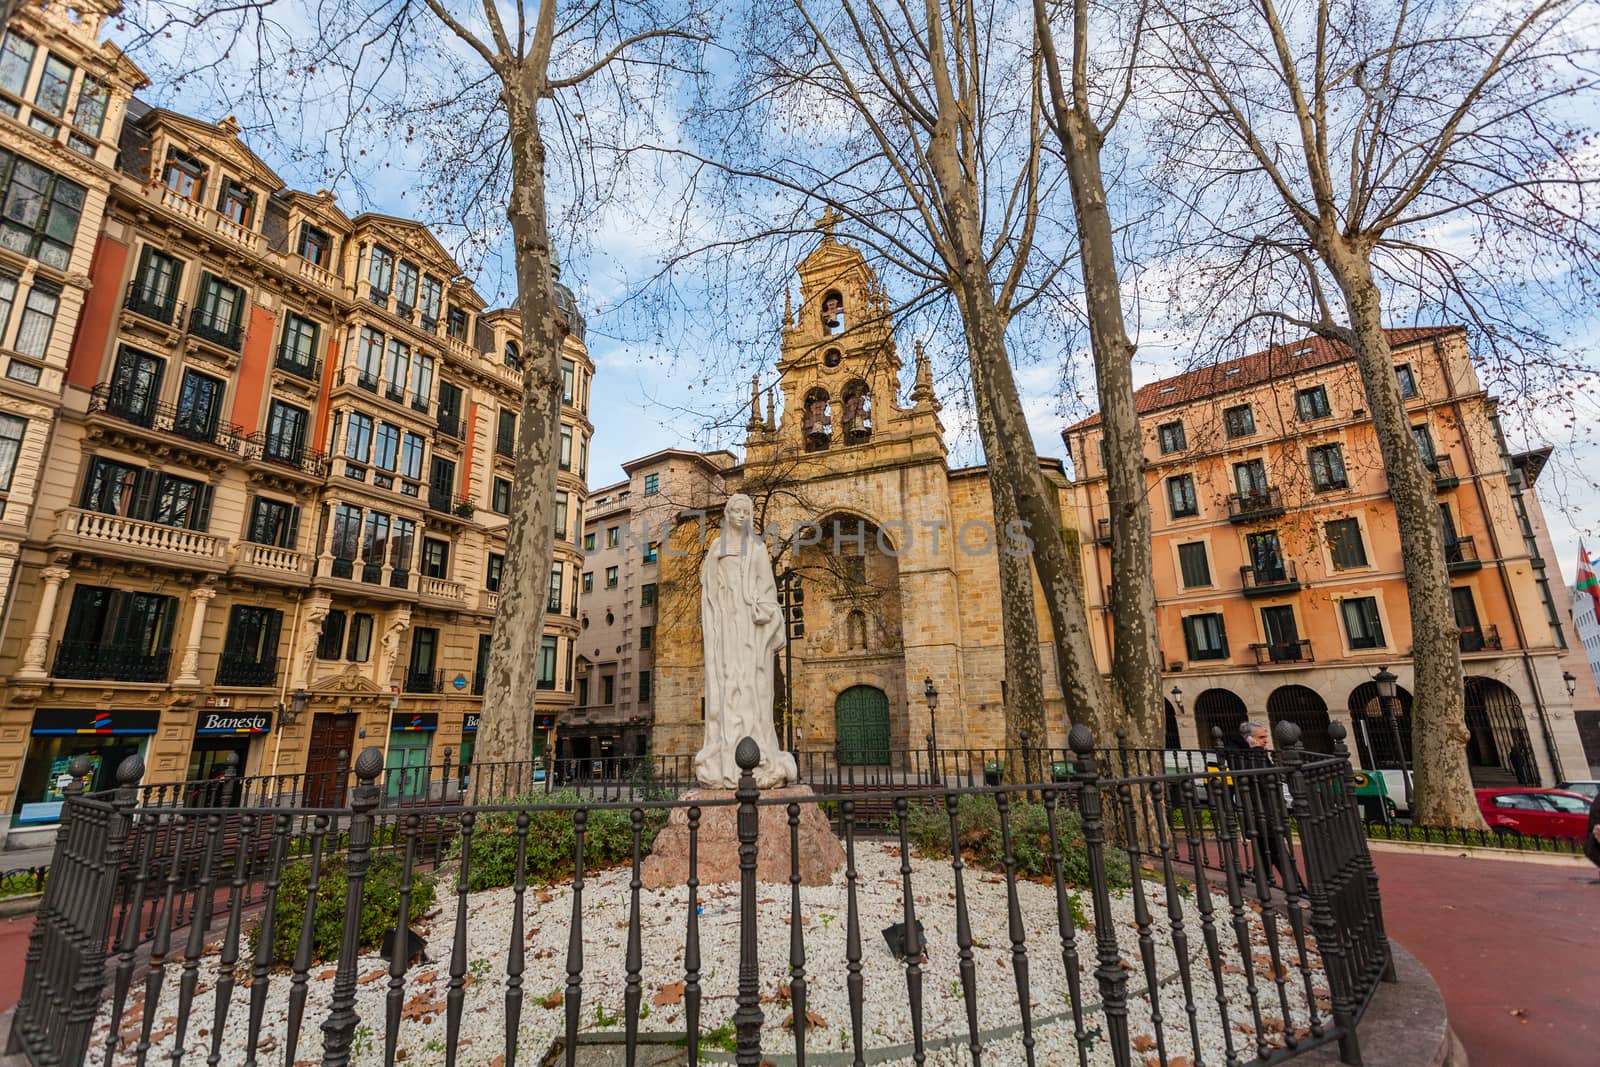 San Vicente square in Bilbao by imagsan